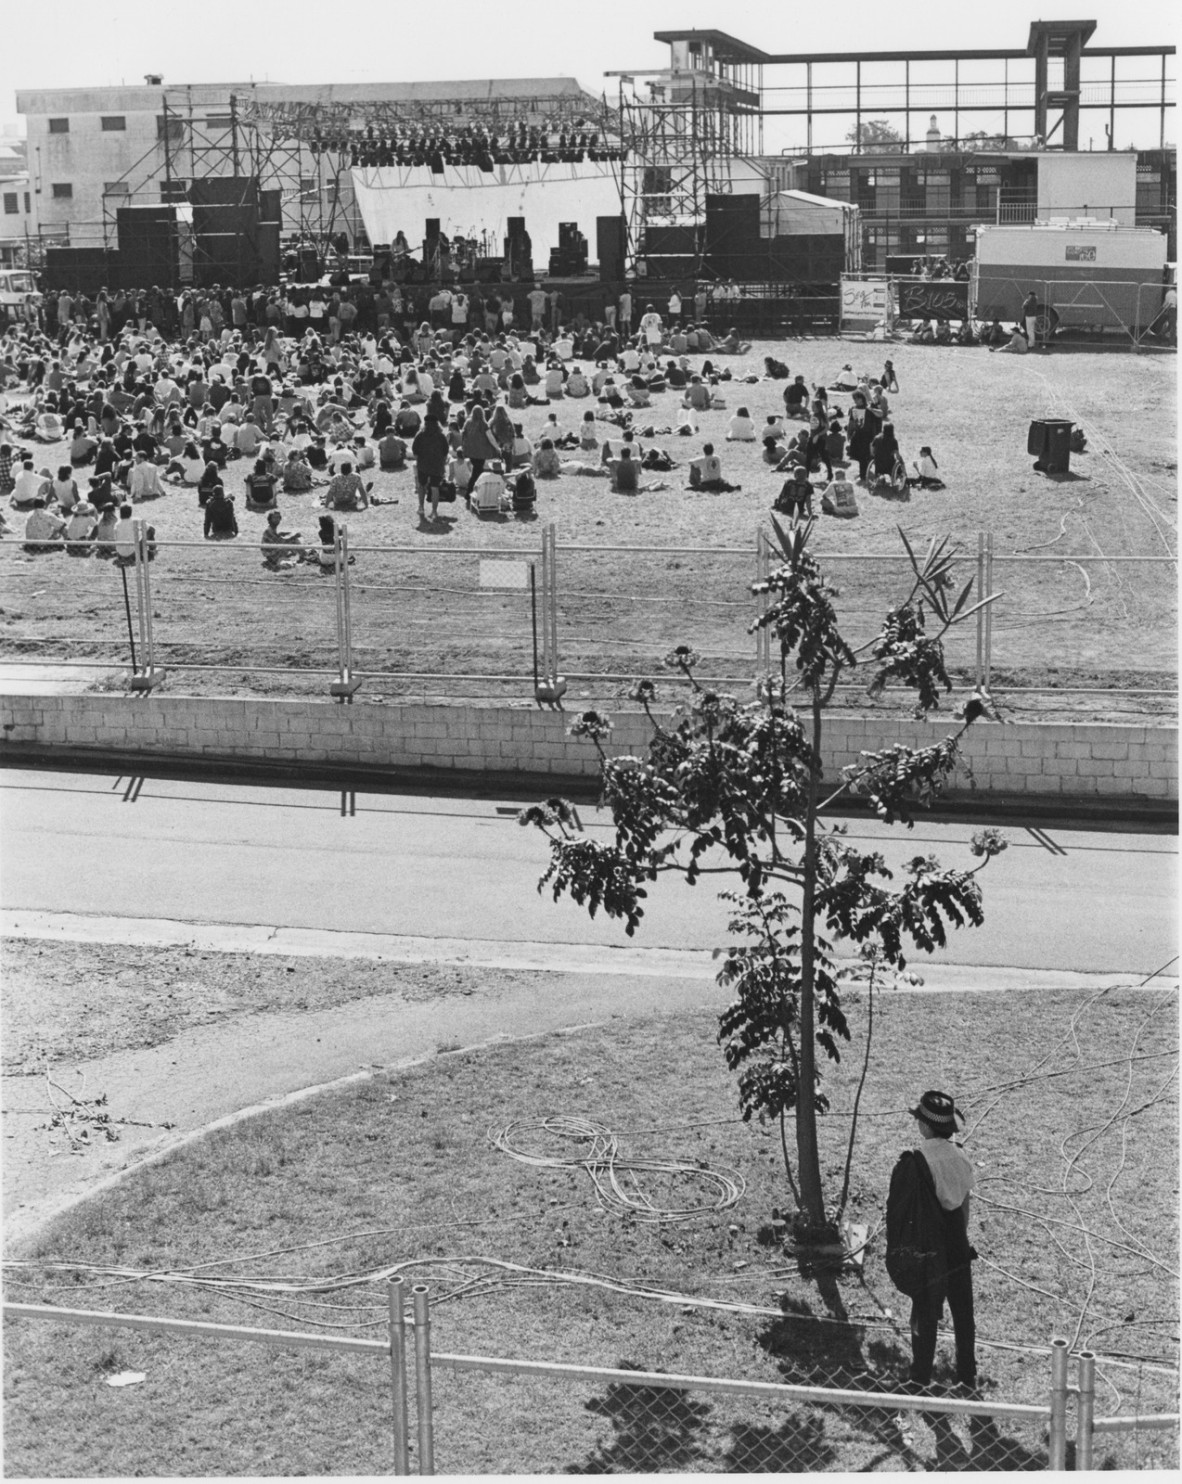 Photography by Kathy Dora. View of the crowd and stage at the Jailhouse Rock concert held at Boggo Road Gaol in Dutton Park, Brisbane, 1993. In copyright. John Oxley Library, State Library of Queensland. Image 27175-0001-0006